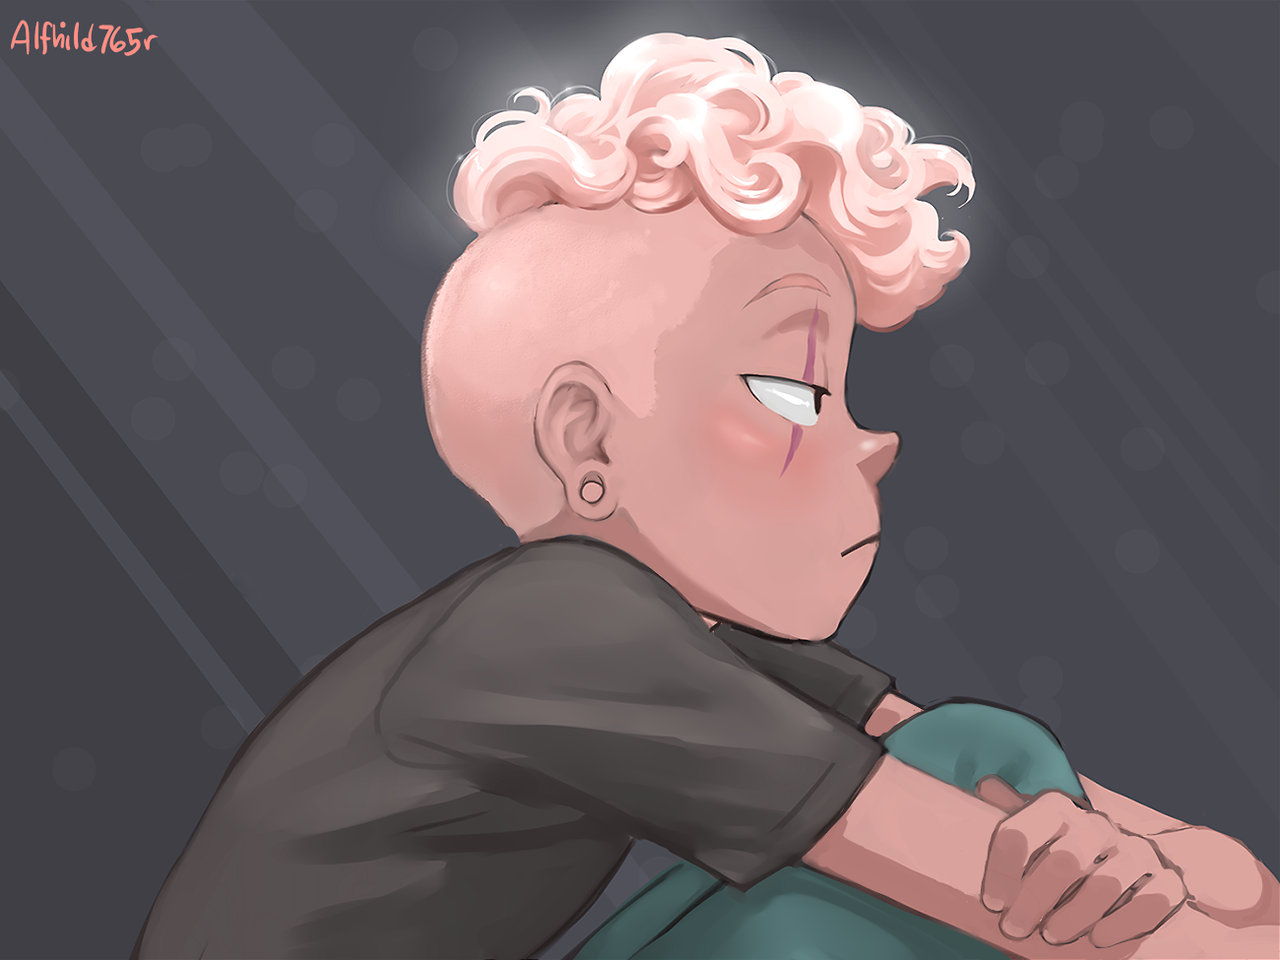 Doodle of Lars I did awhile back! He’s been one of my favorite characters and I was super excited to see him so involved in the last story arc :D